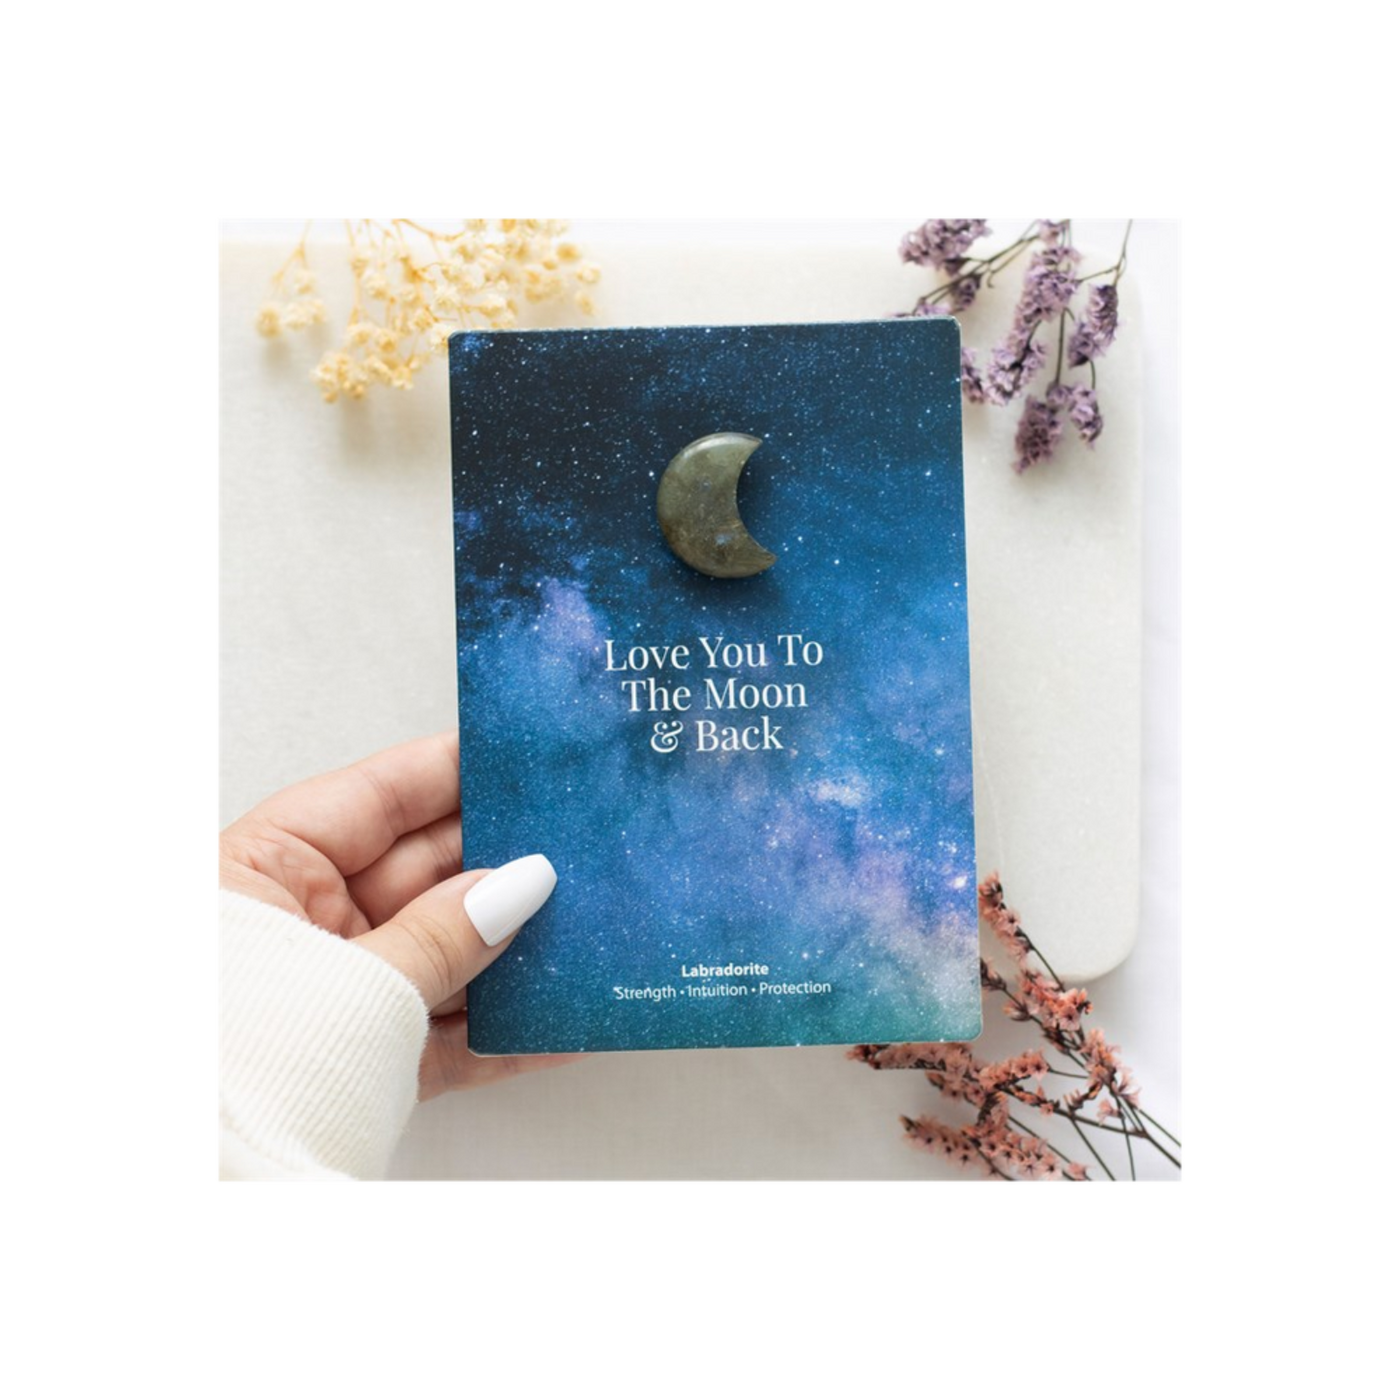 Love You To The Moon & Back Labradorite Moon Shaped Crystal On A Greeting Card.